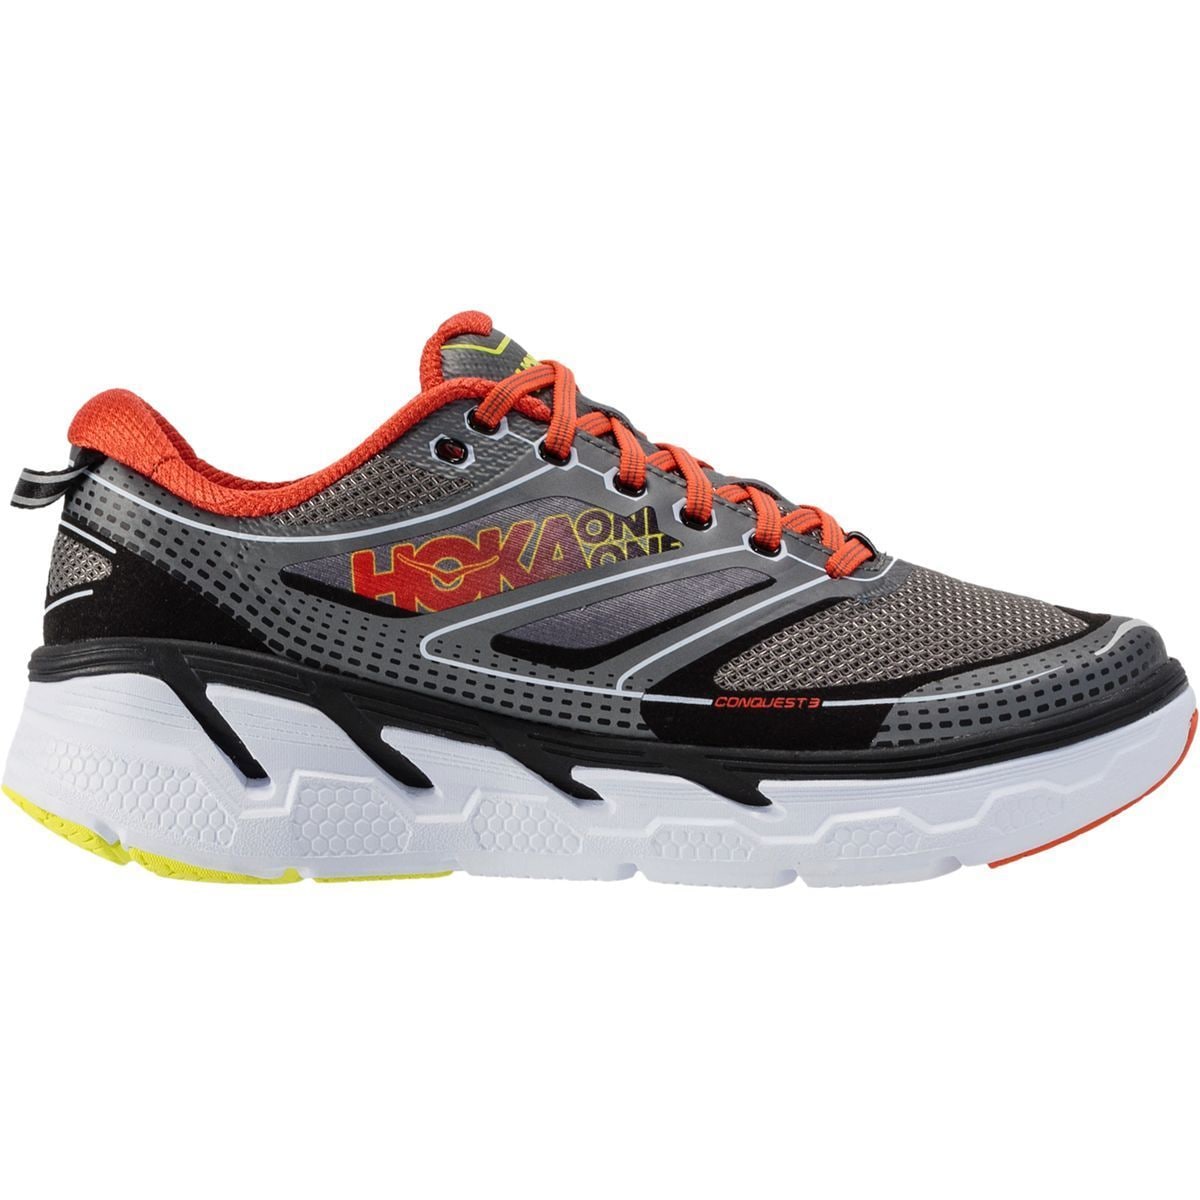 Hoka One One Conquest 3 Running Shoe Mens